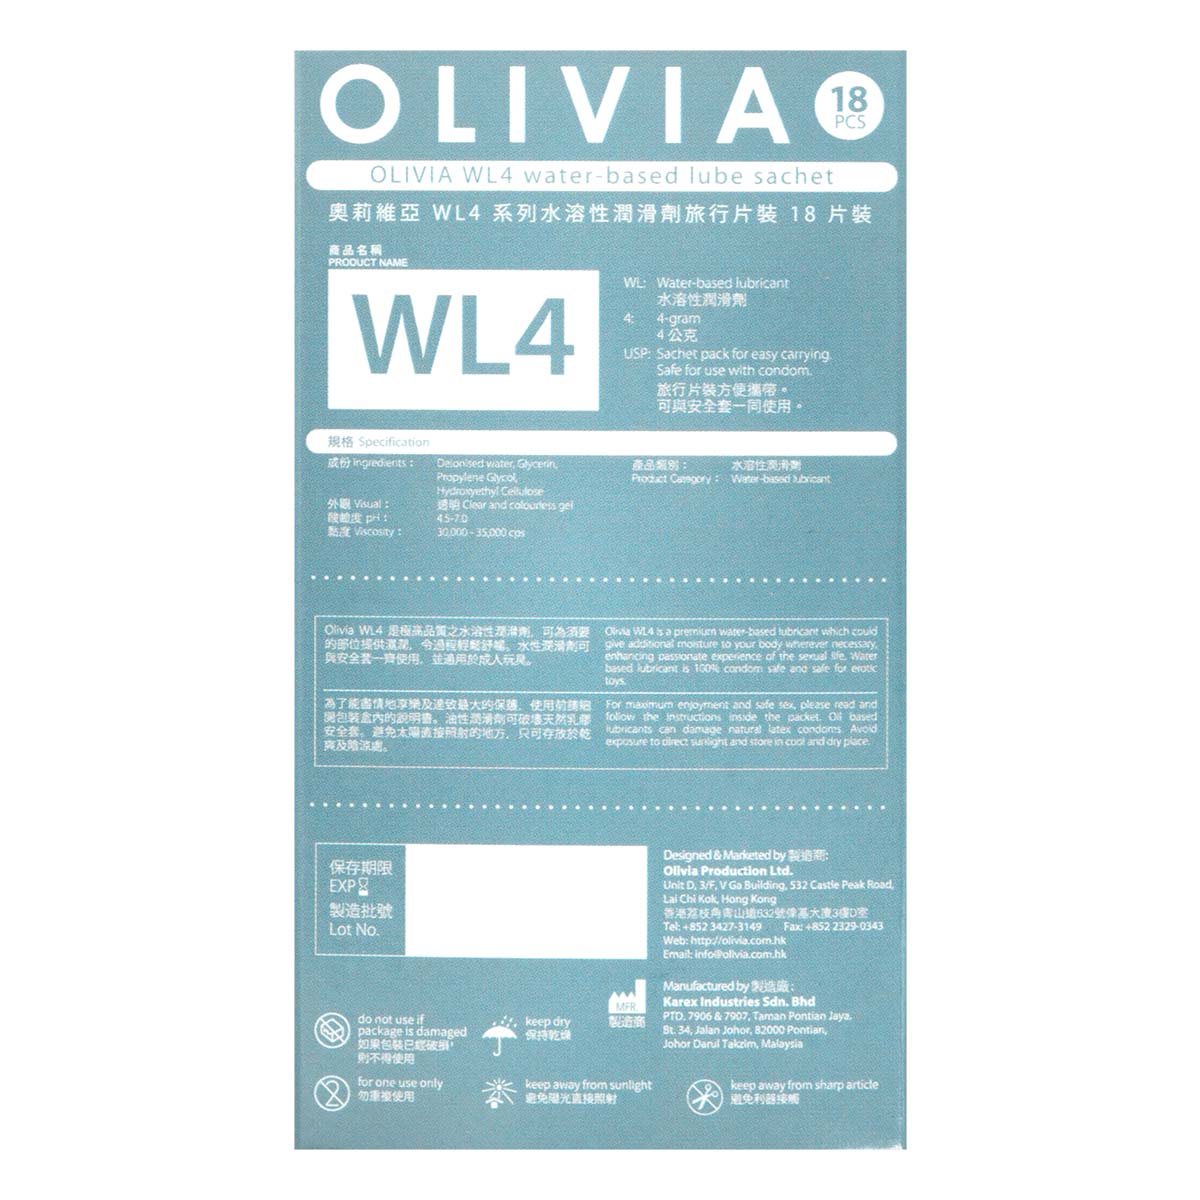 Olivia Maldives Hydro 4g (sachet) 18 pieces Water-based Lubricant-p_3